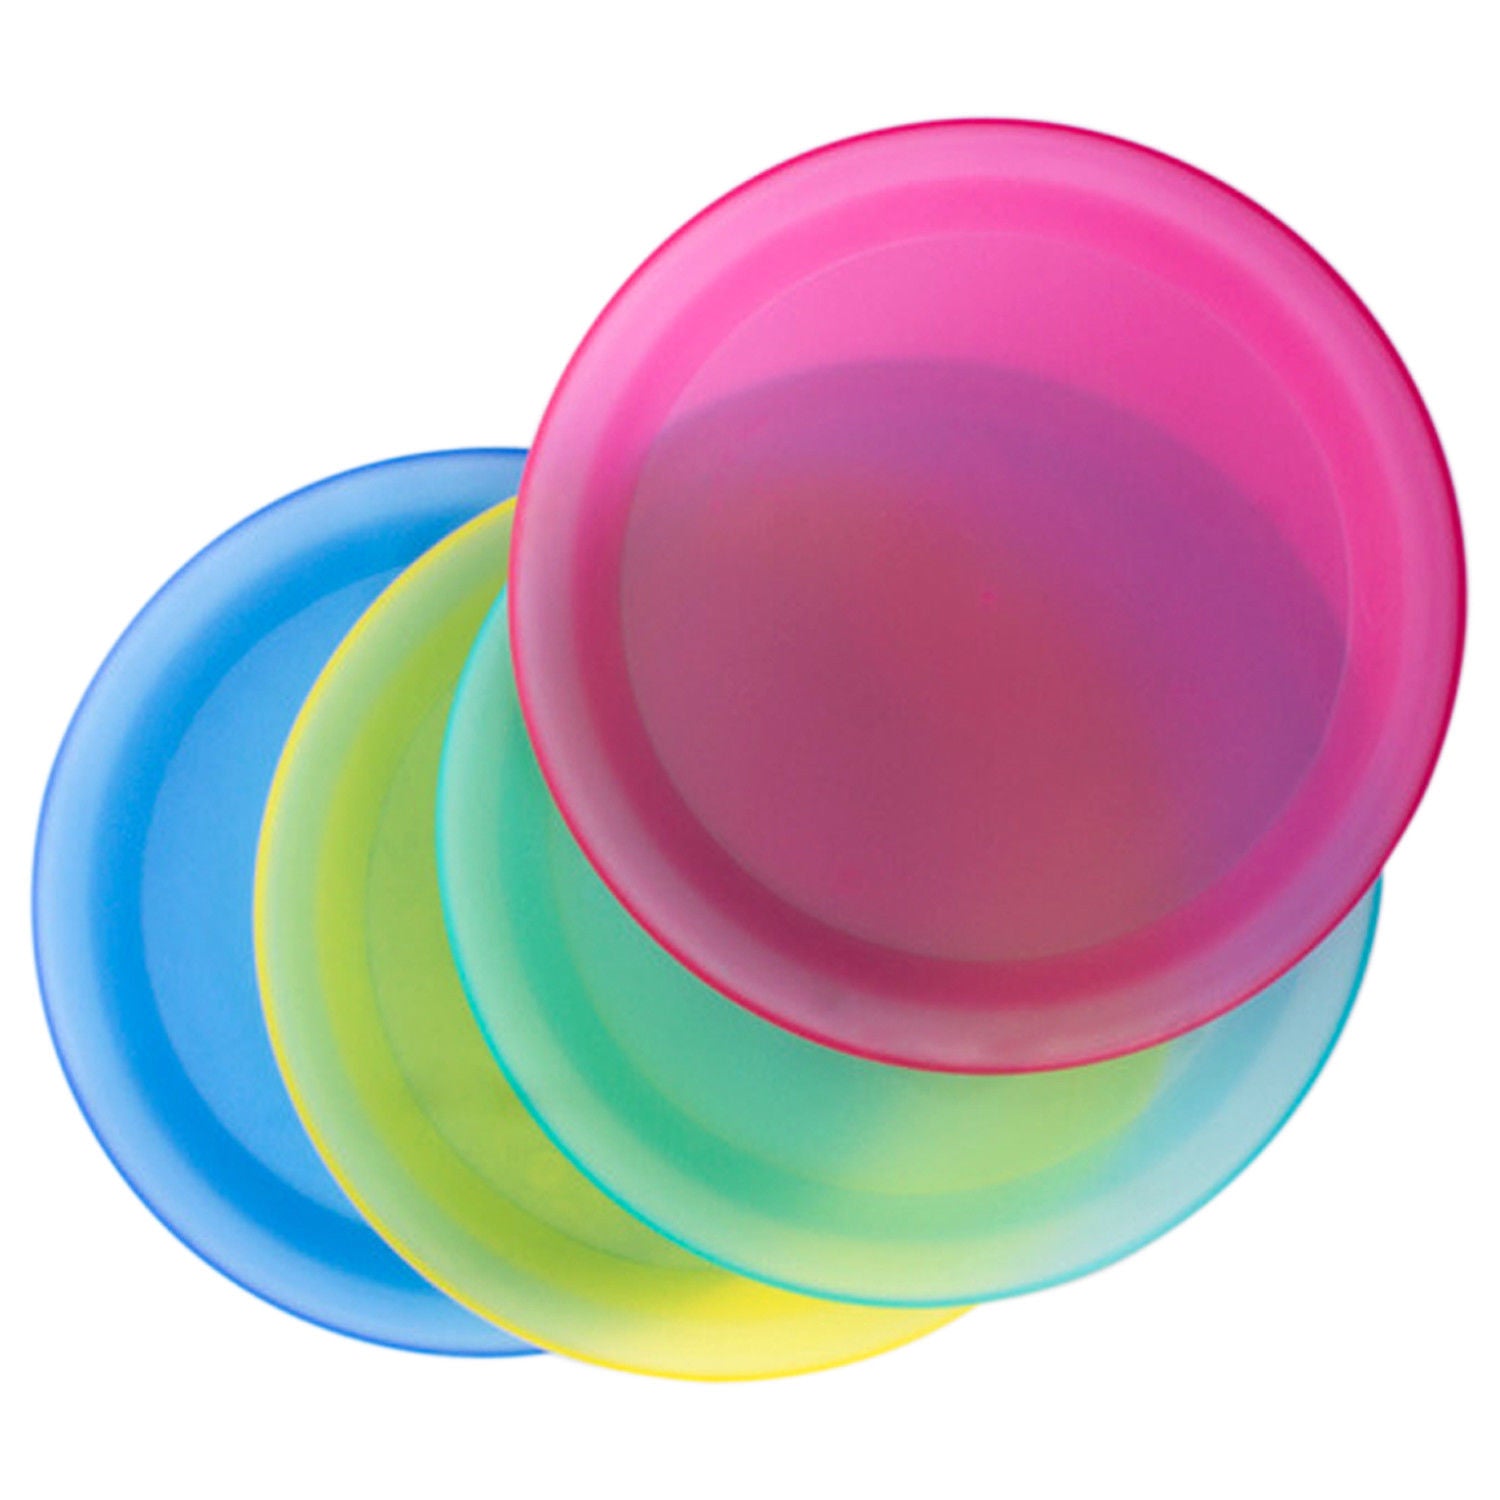 Colorful Sturdy Reusable Dinner Plates - Party BPA - Free Plastic Plates